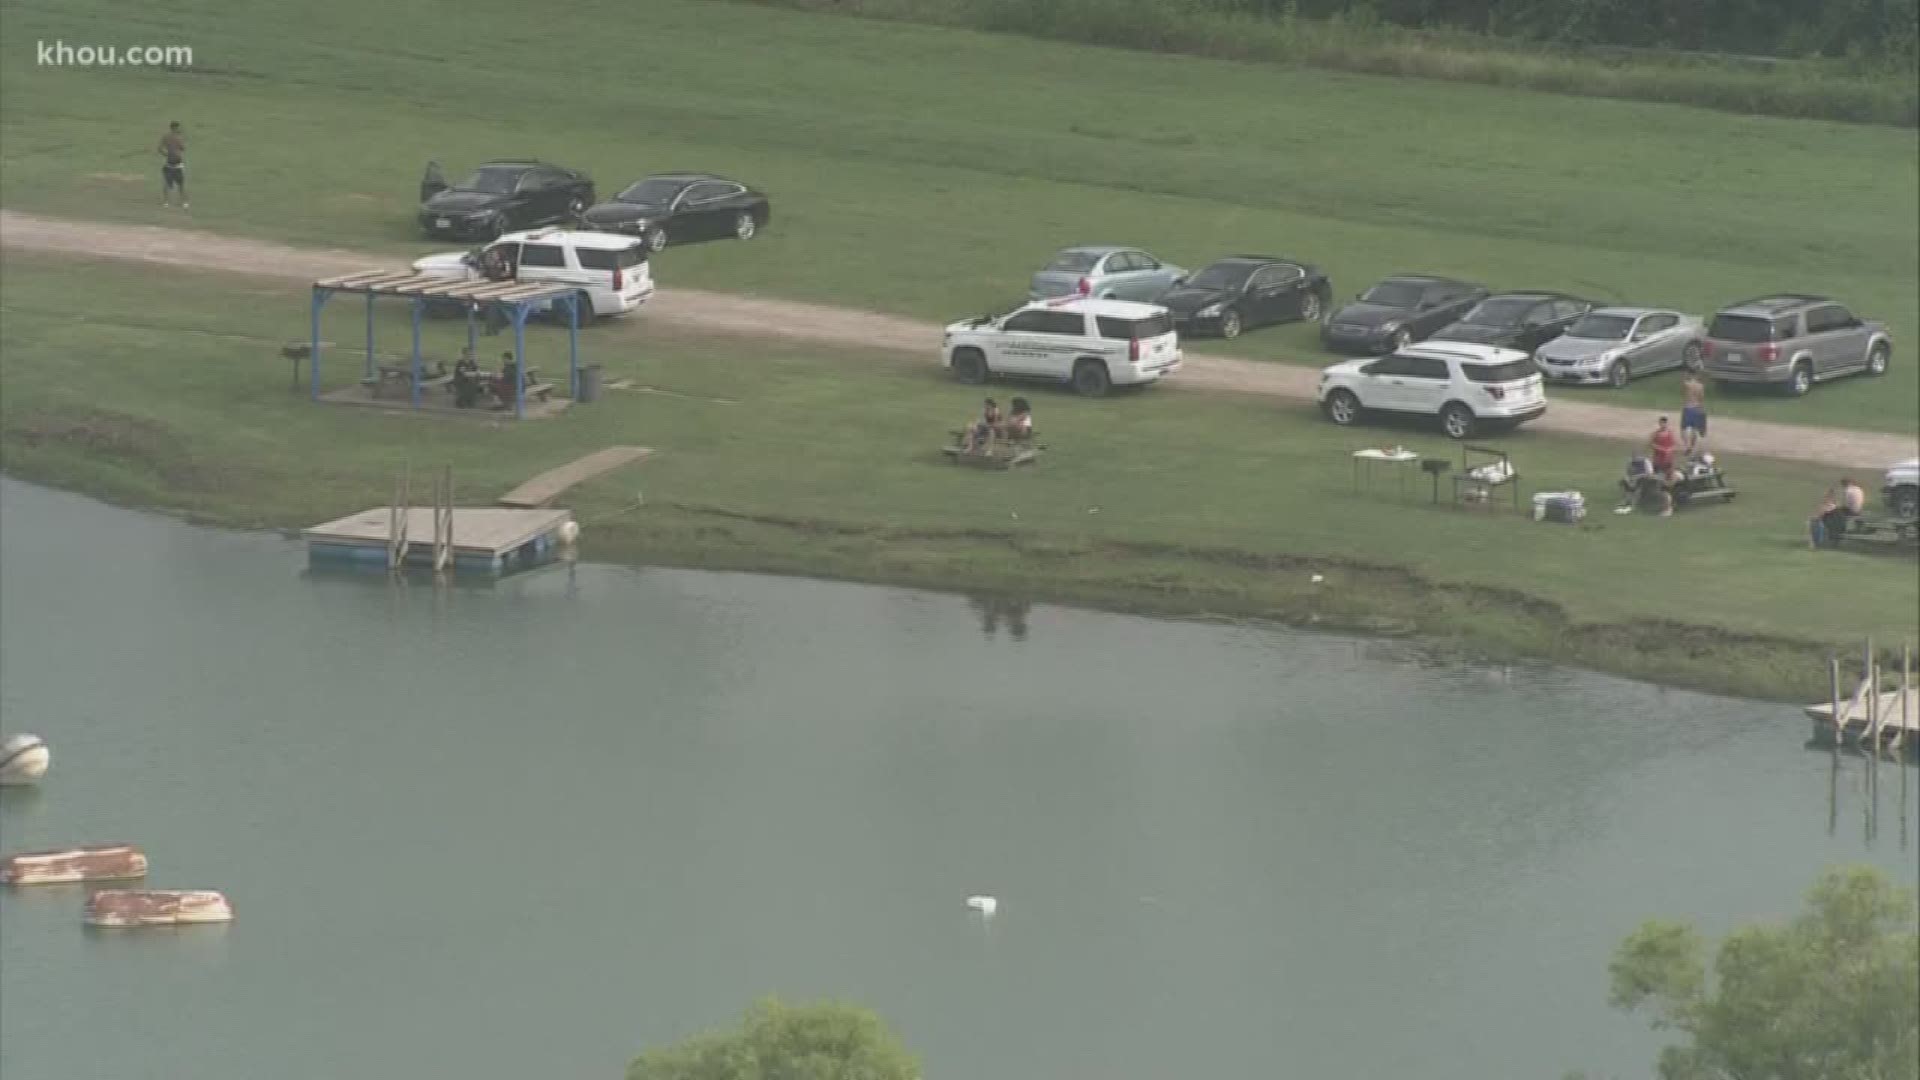 Police pulled the body of 24-year-old Timothy Beatty from a lake in Manvel after he disappeared.